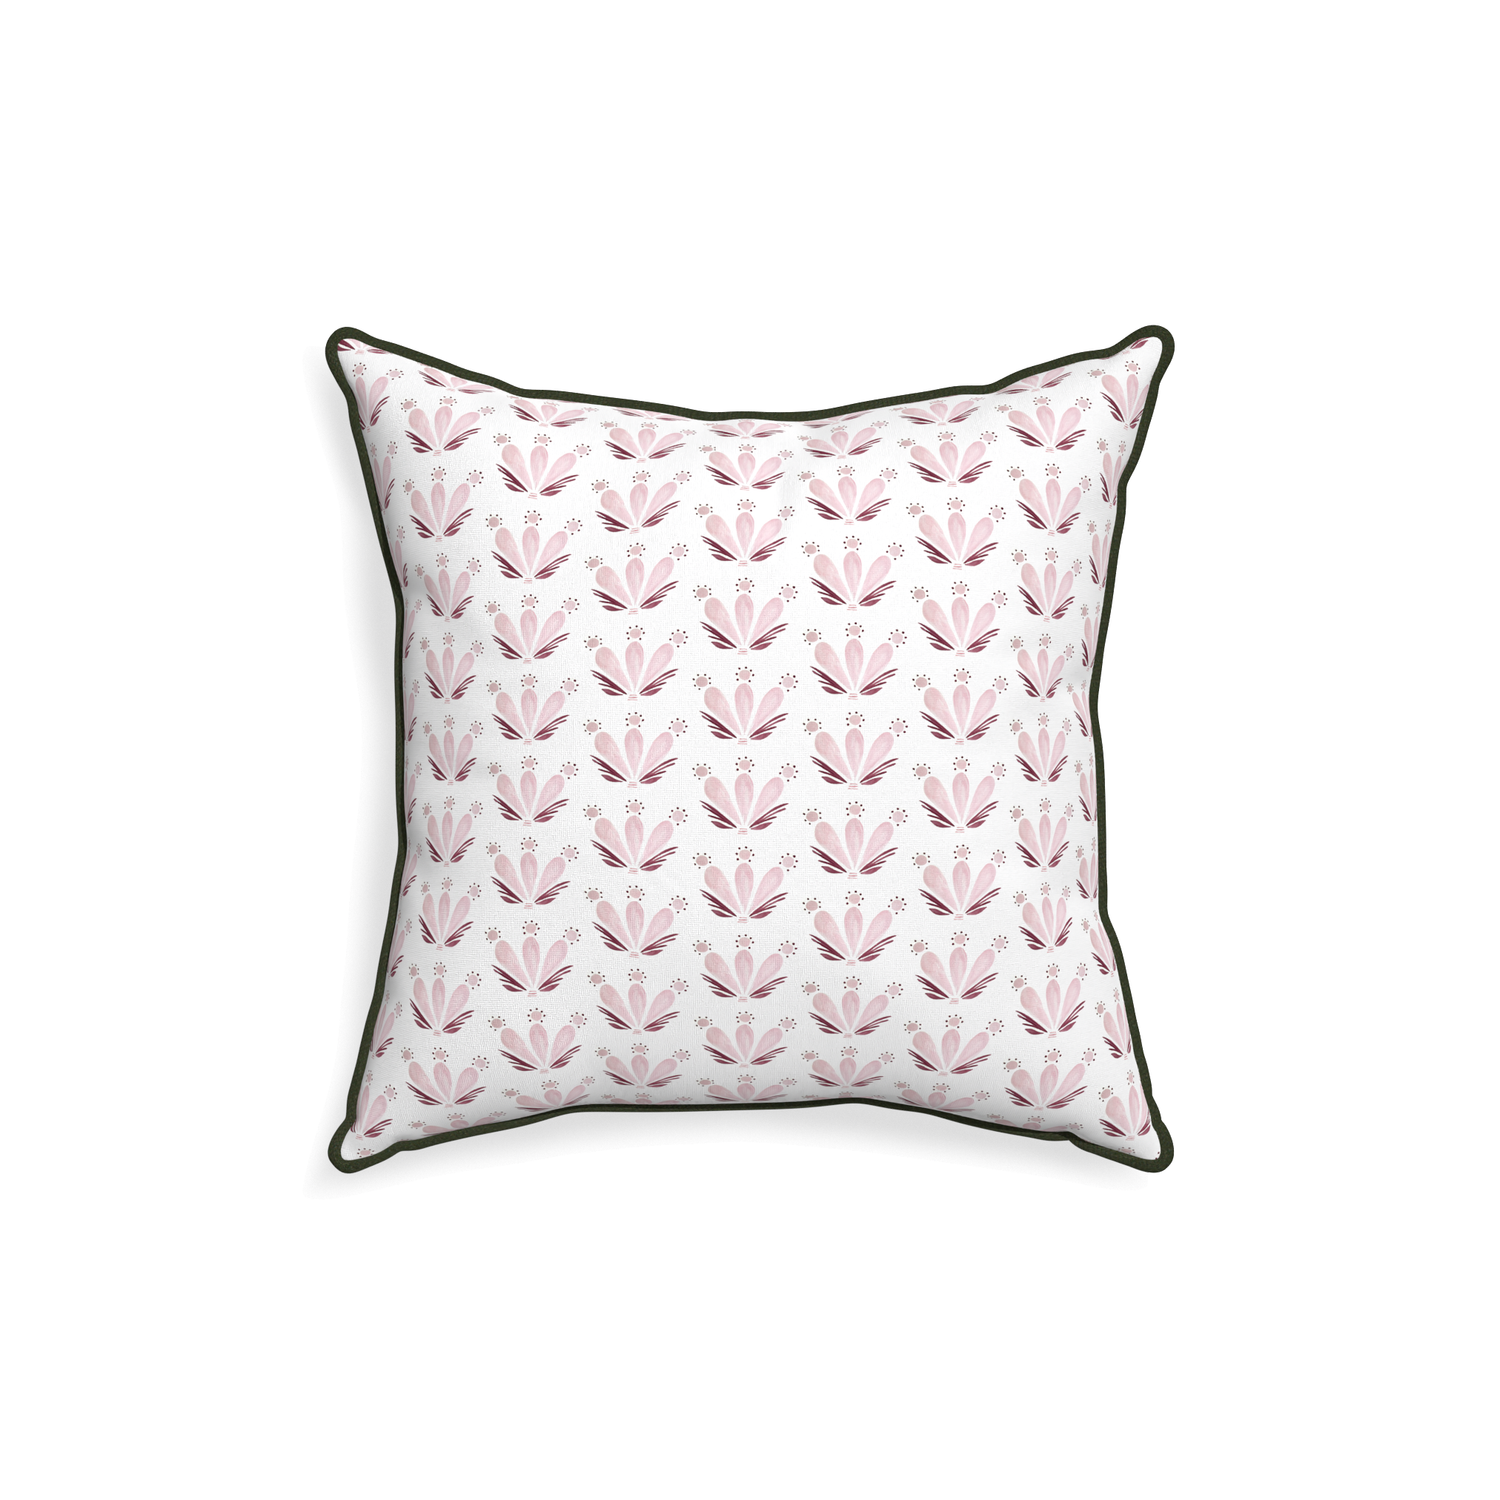 18-square serena pink custom pink & burgundy drop repeat floralpillow with f piping on white background